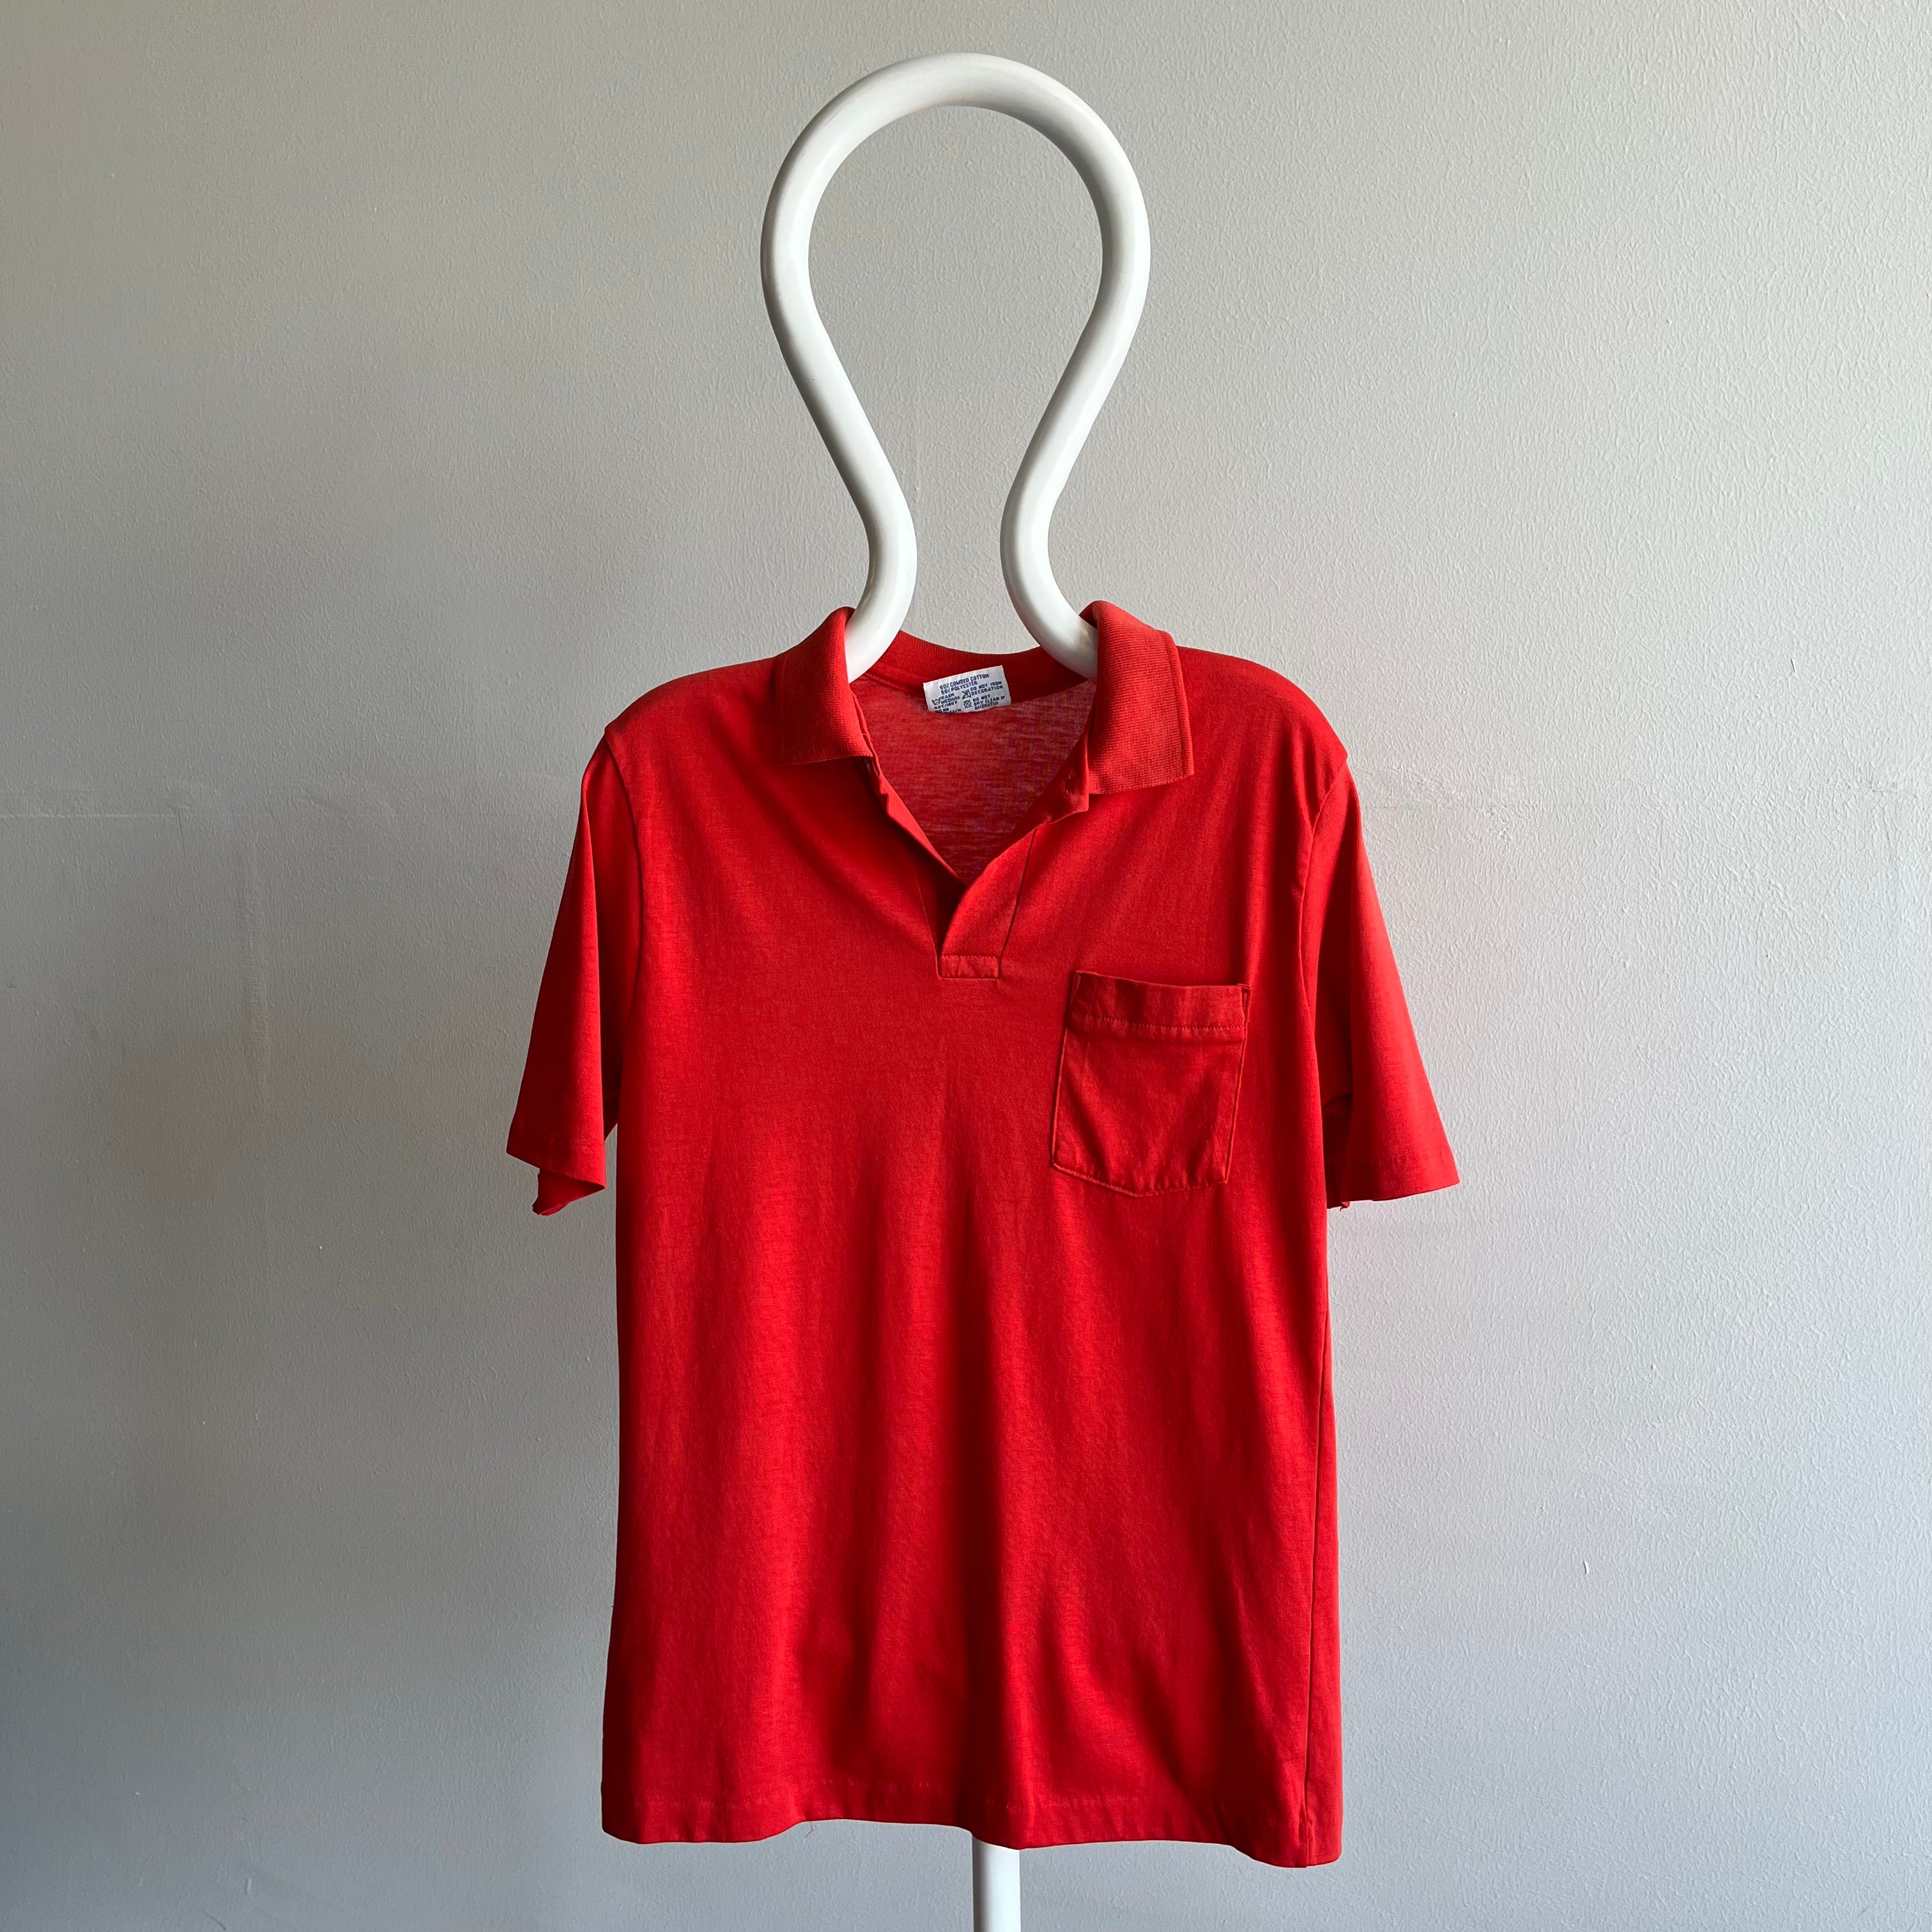 1980s Silky Jersey Polo Shirt with a Backside